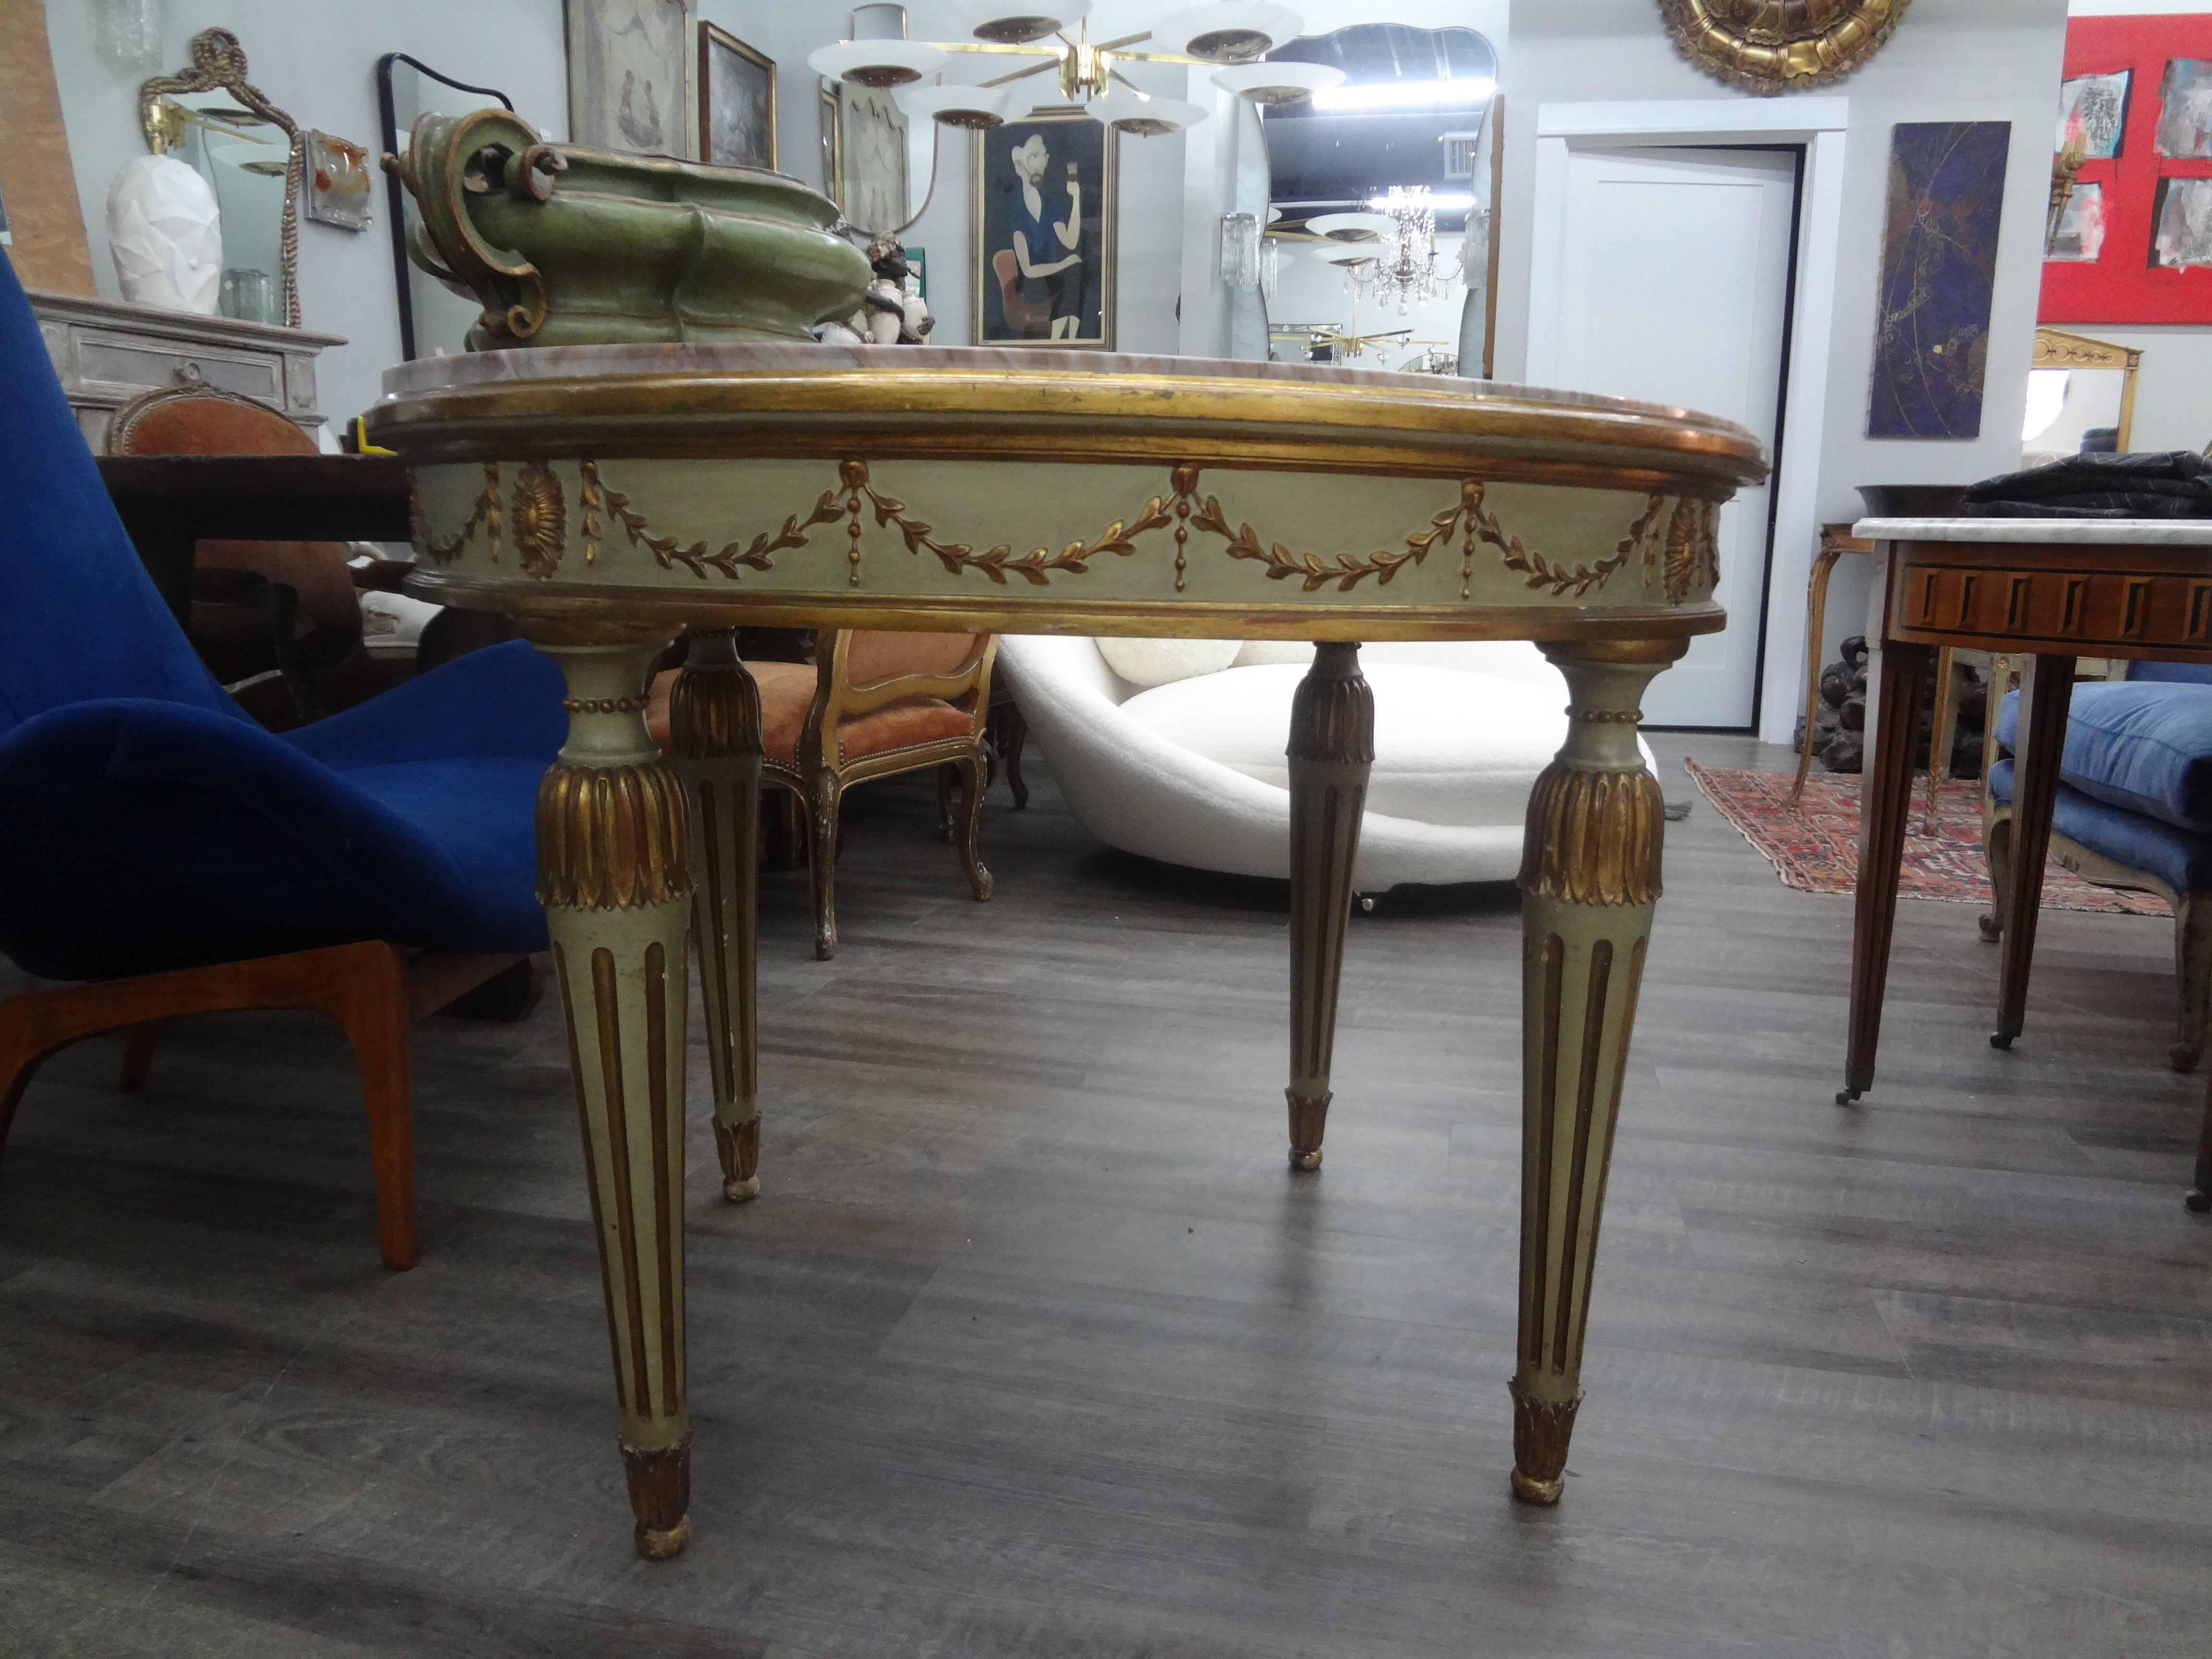 Italian Neoclassical Style Painted and Parcel Gilt Center Table.
This versatile antique Italian painted and parcel giltwood table can be used as a center table, dining table or game table. It retains the beautiful original marble top.
Stunning!